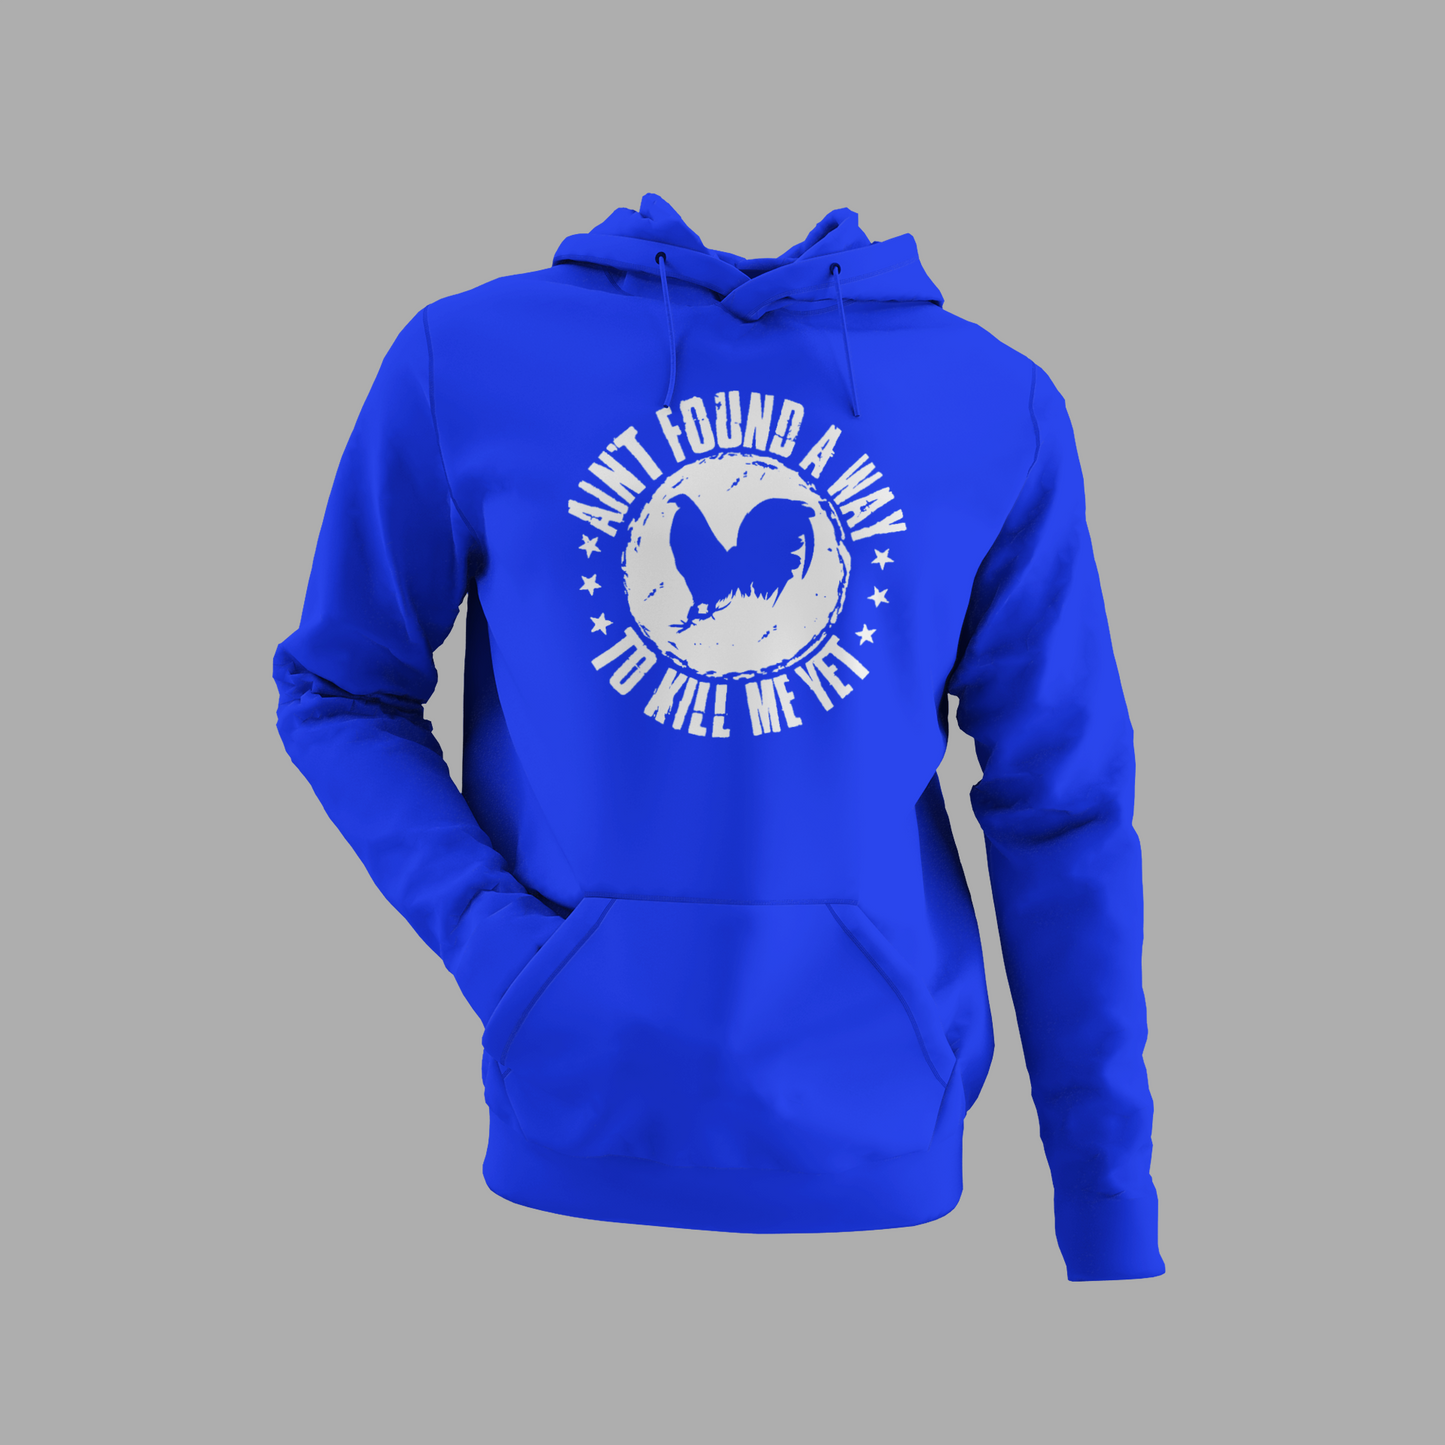 Ain't Found A Way To Kill Me Yet Cockfighting Hoodie